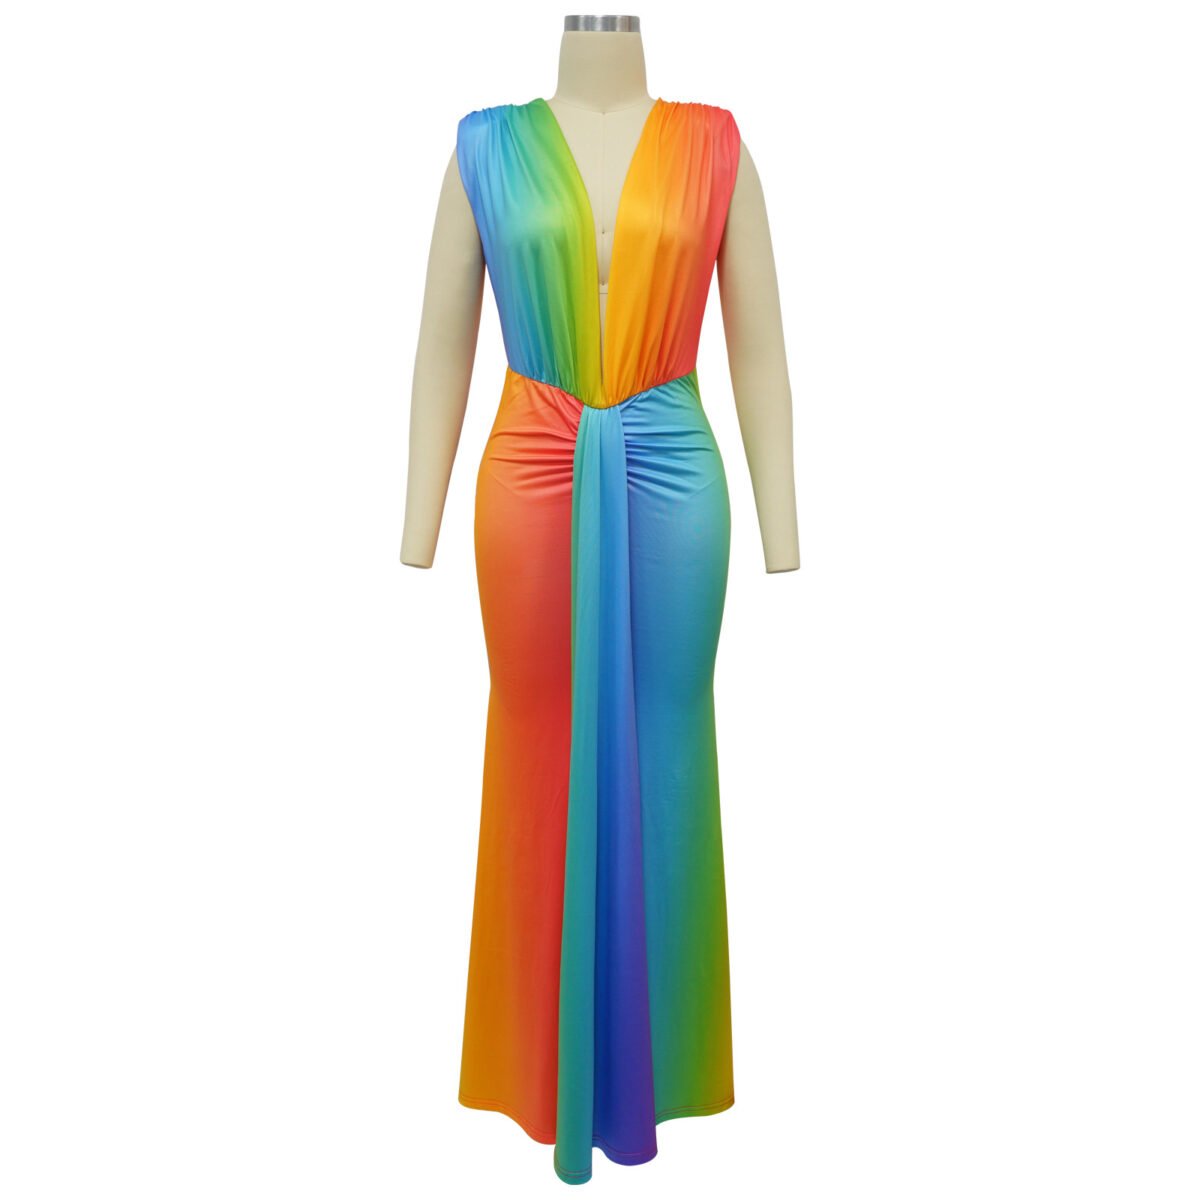 Multicolored rainbow printed sleeveless bodycon dress with plunging V-neckline.